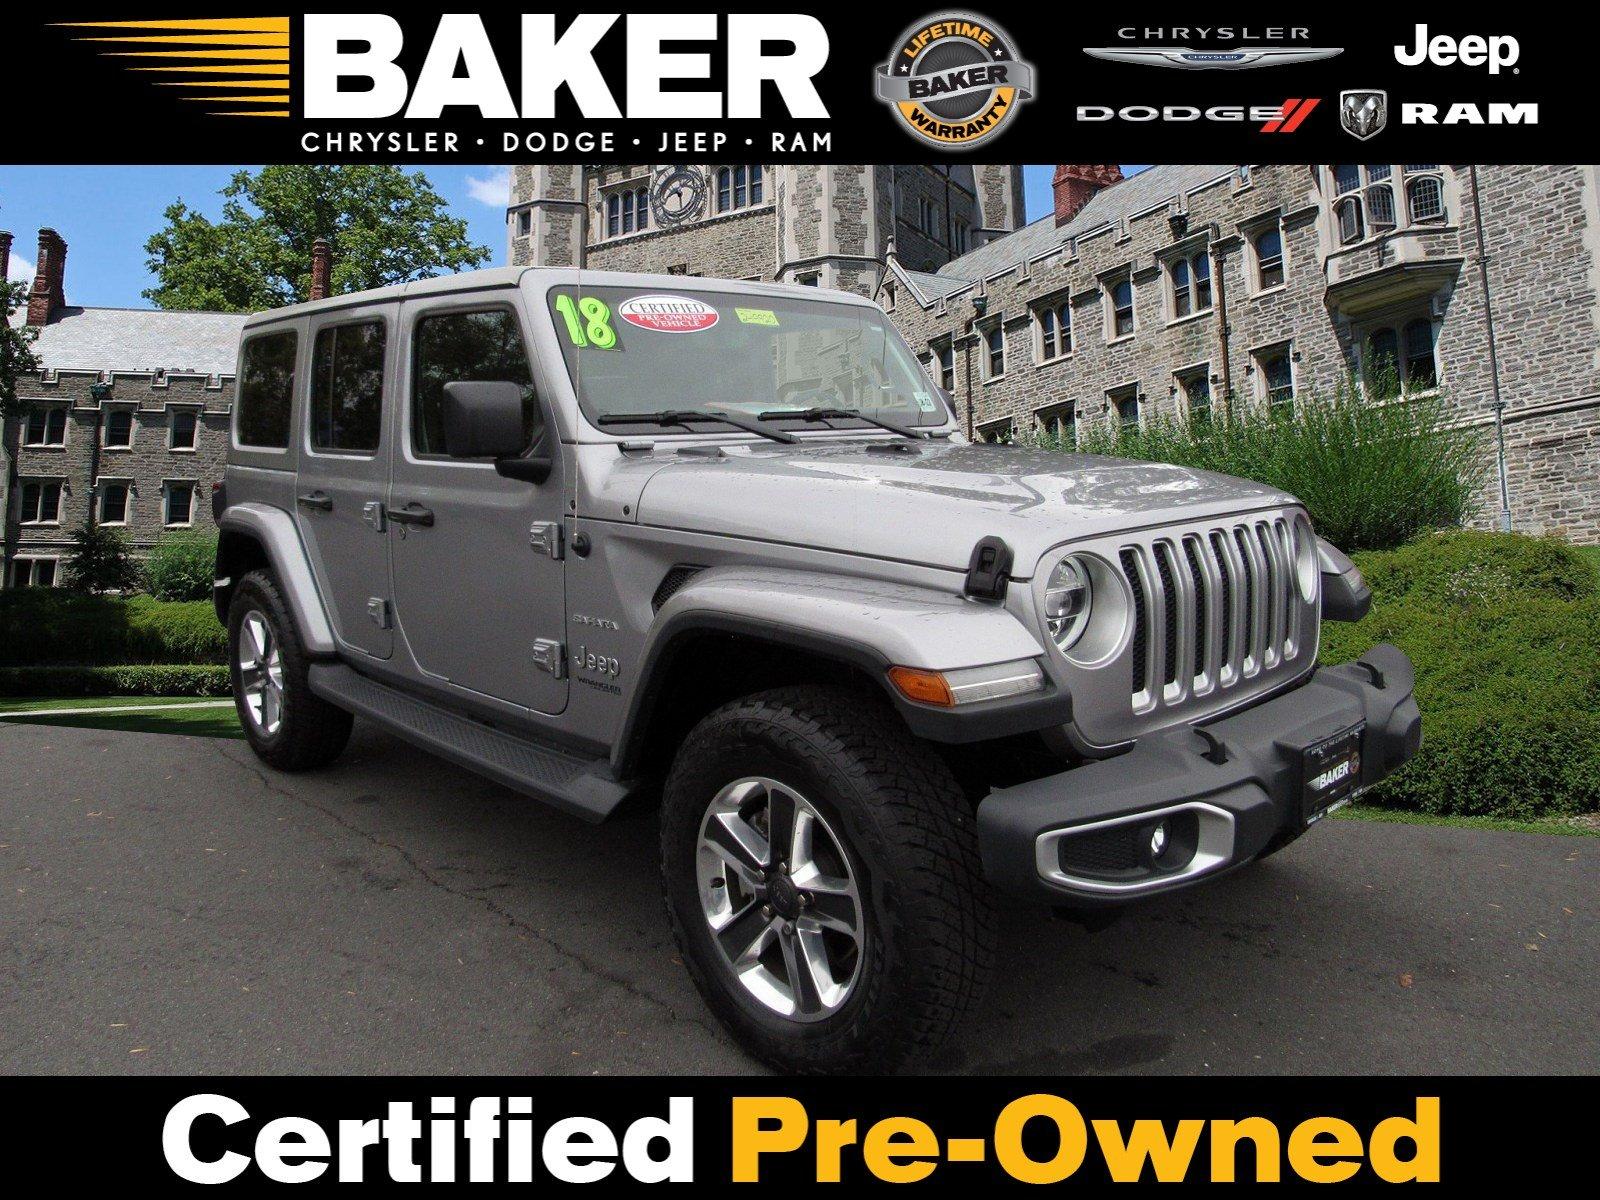 Used 2018 Jeep Wrangler Unlimited Sahara For Sale ($39,995) | Victory Lotus  Stock #249920